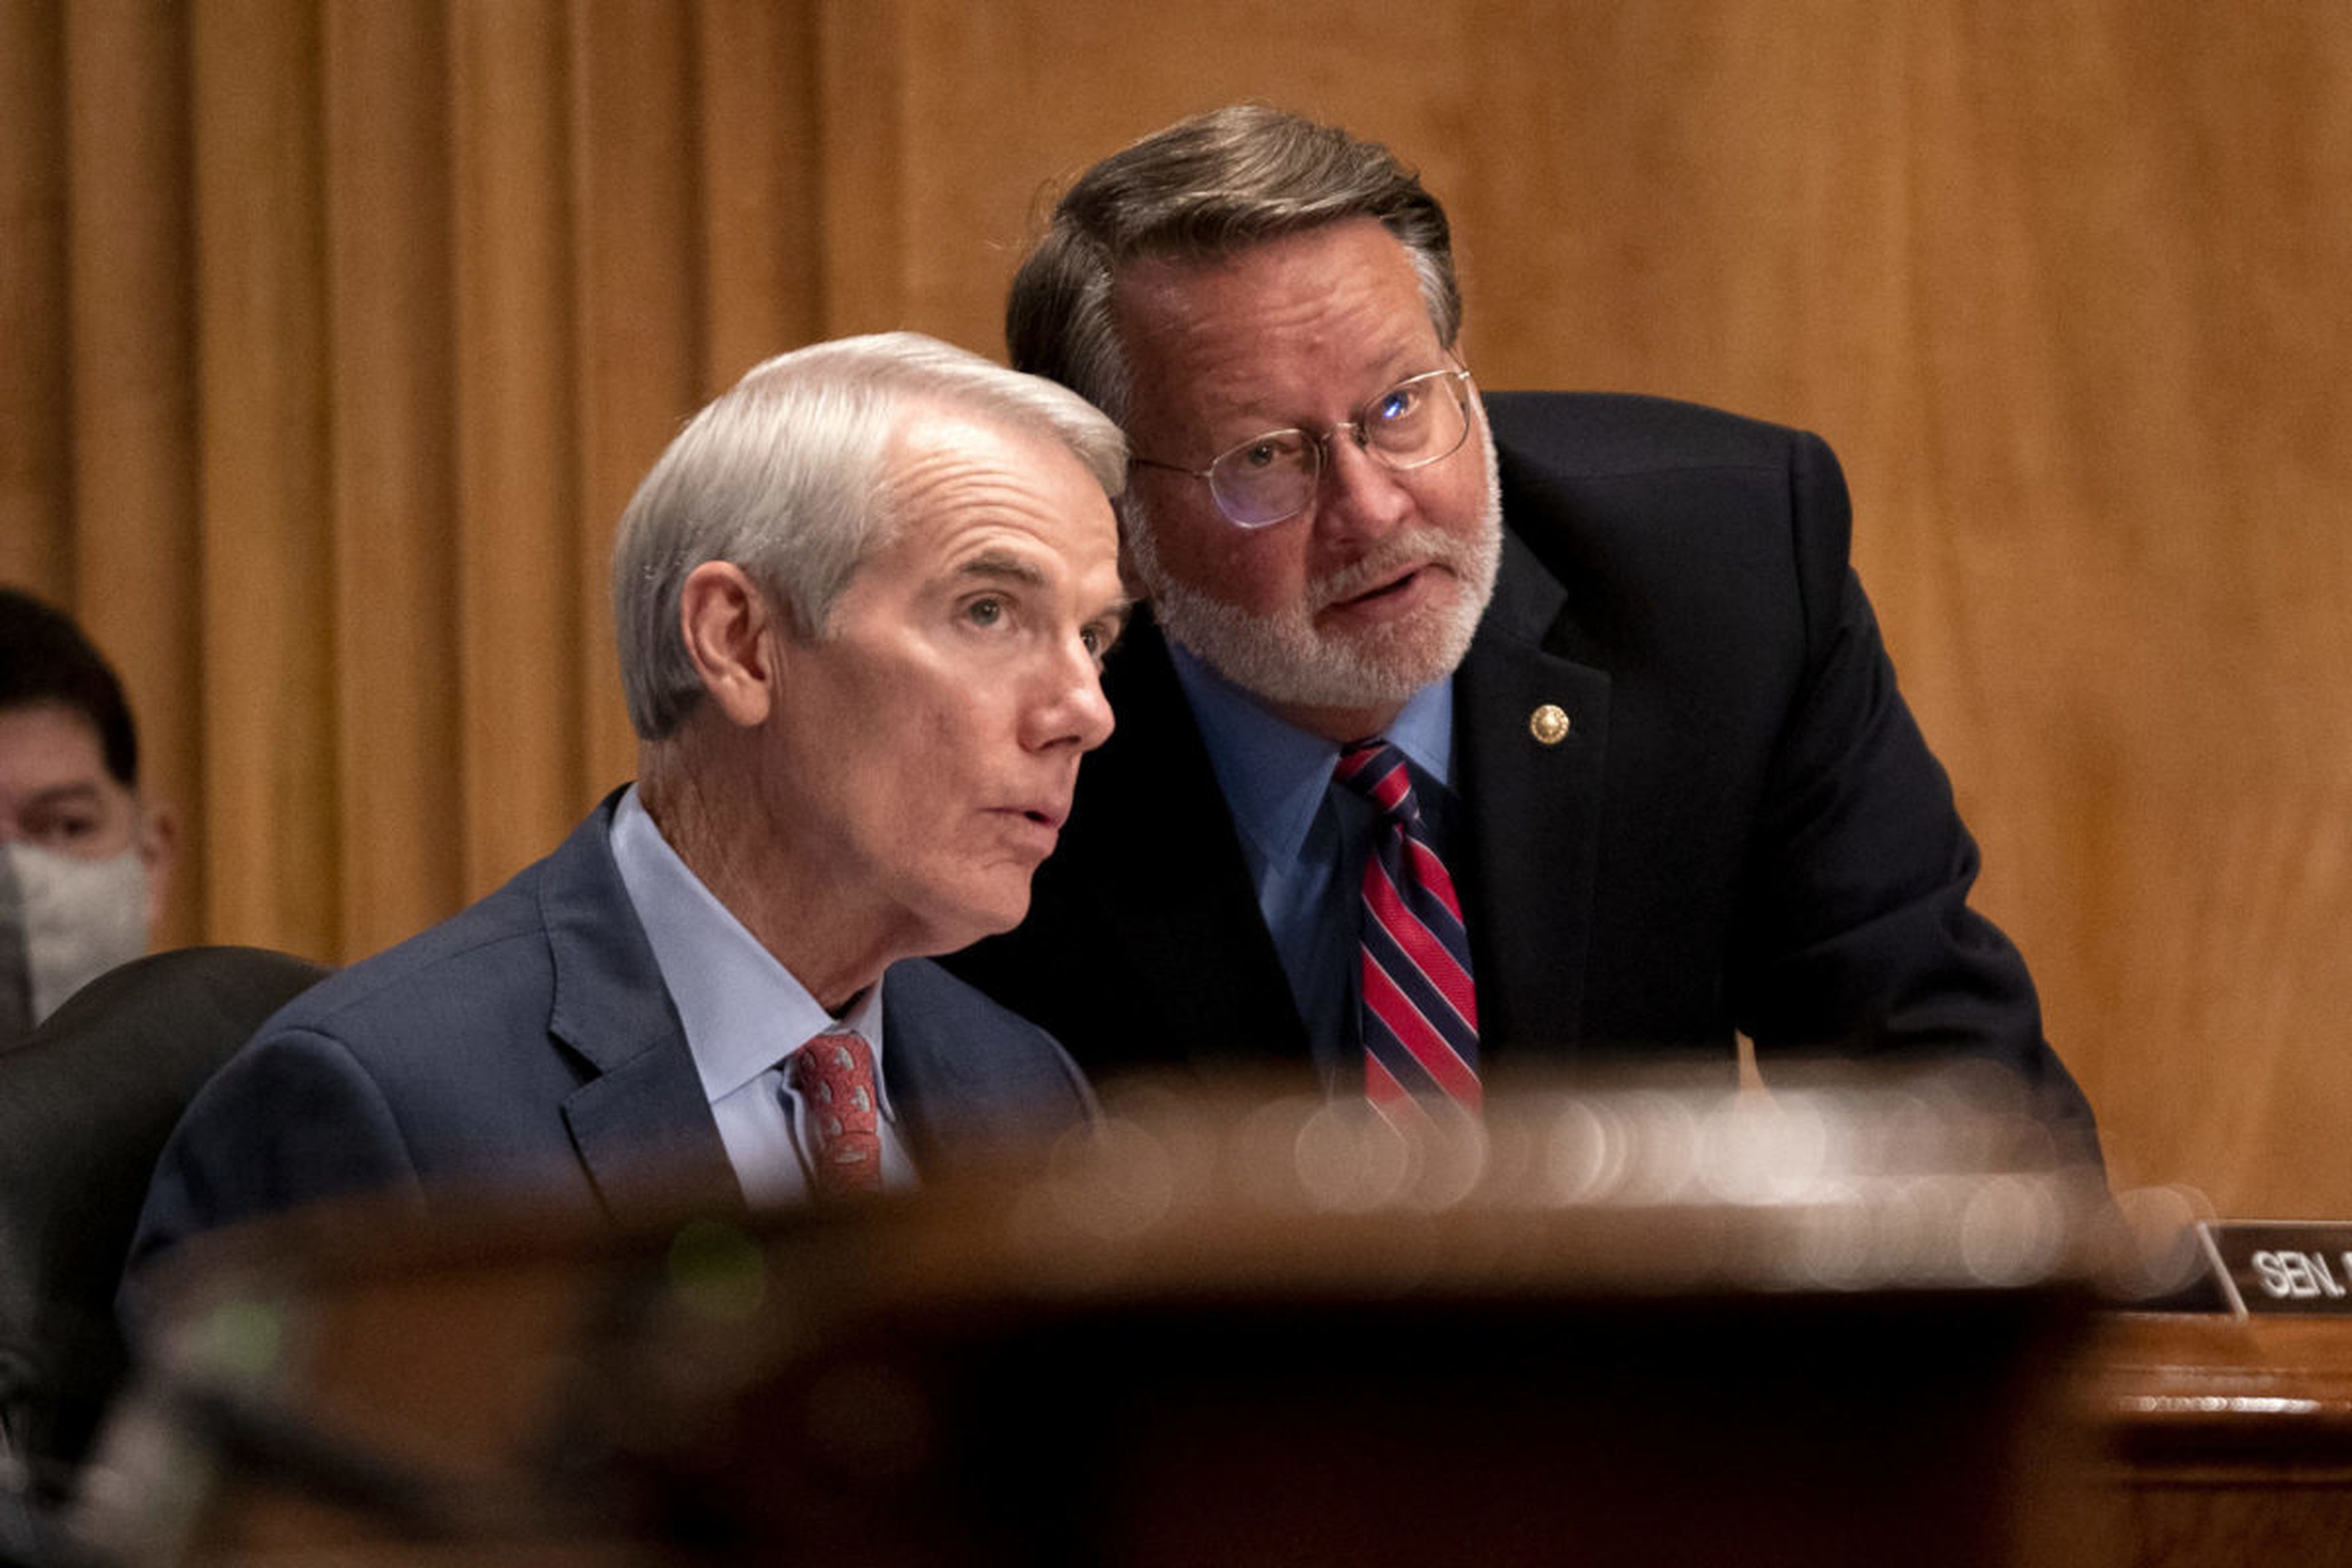 Sen. Rob Portman, R-Ohio, left, speaks to Sen. Gary Peters, D-Mich., at a hearing to discuss security threats 20 years after the 9/11 terrorist attacks at the U.S. Capitol on Sept. 21, 2021, in Washington. A provision based on the lawmakers&#8217; cyber incident reporting legislation passed has passed both houses of Congress and is now expected to ...